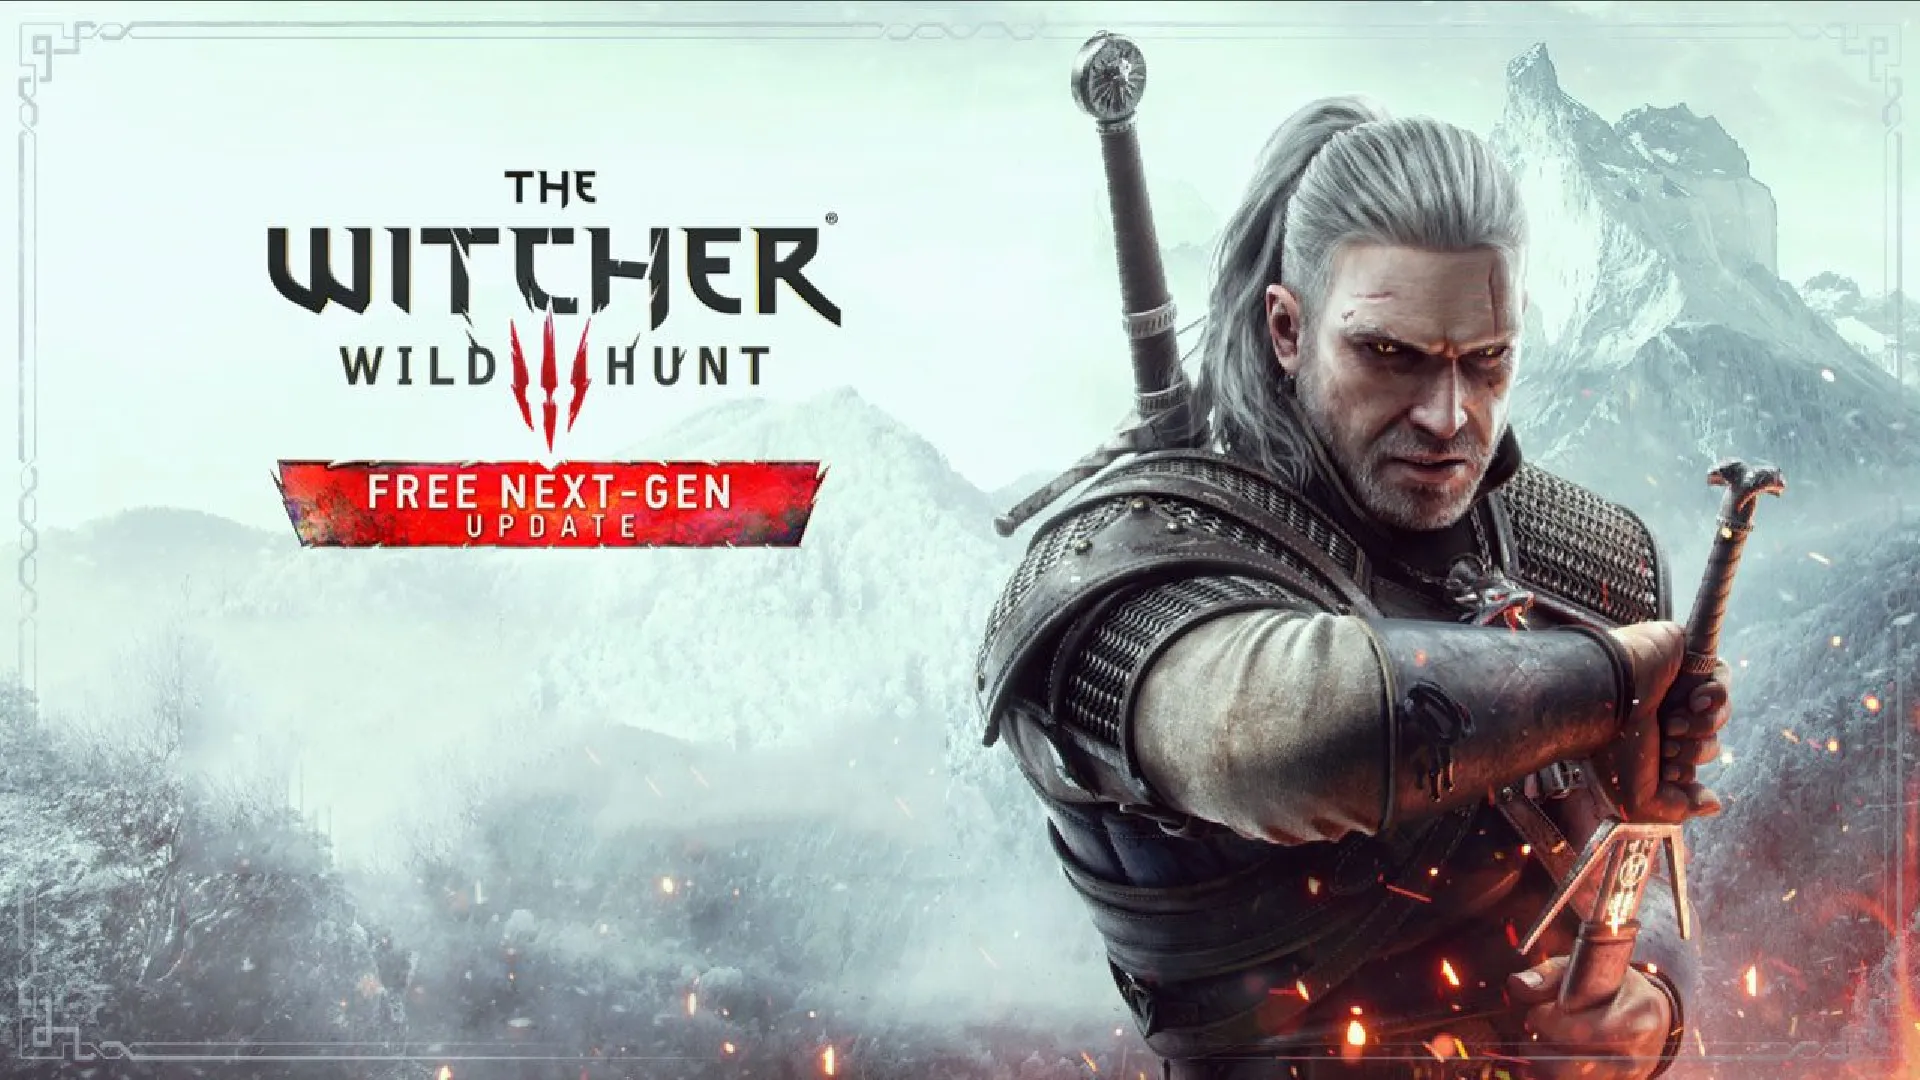 The new version of the Witcher